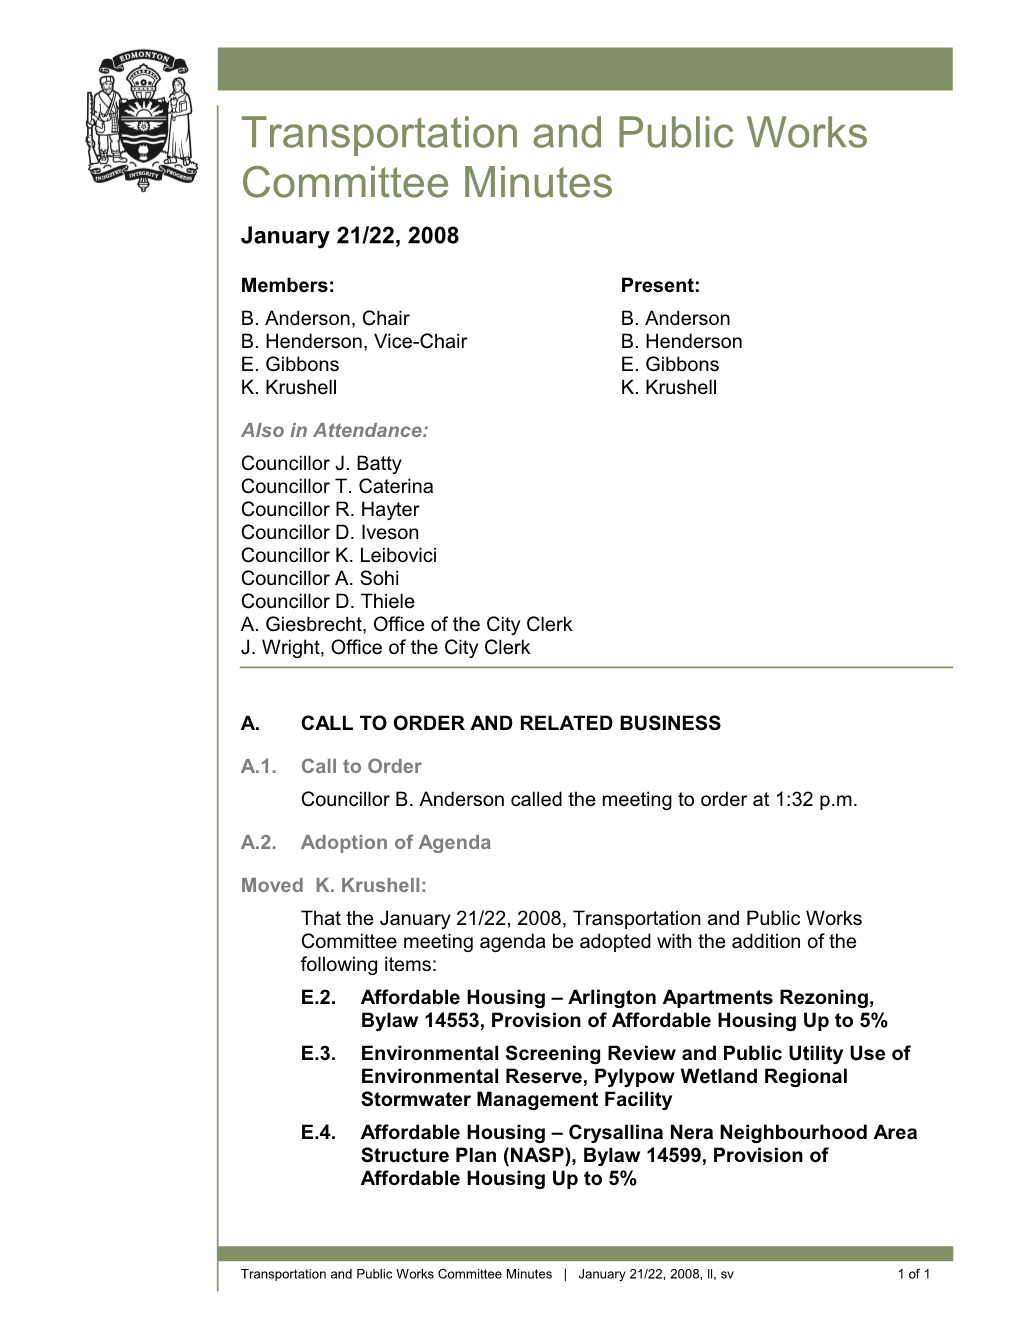 Minutes for Transportation and Public Works Committee January 22, 2008 Meeting